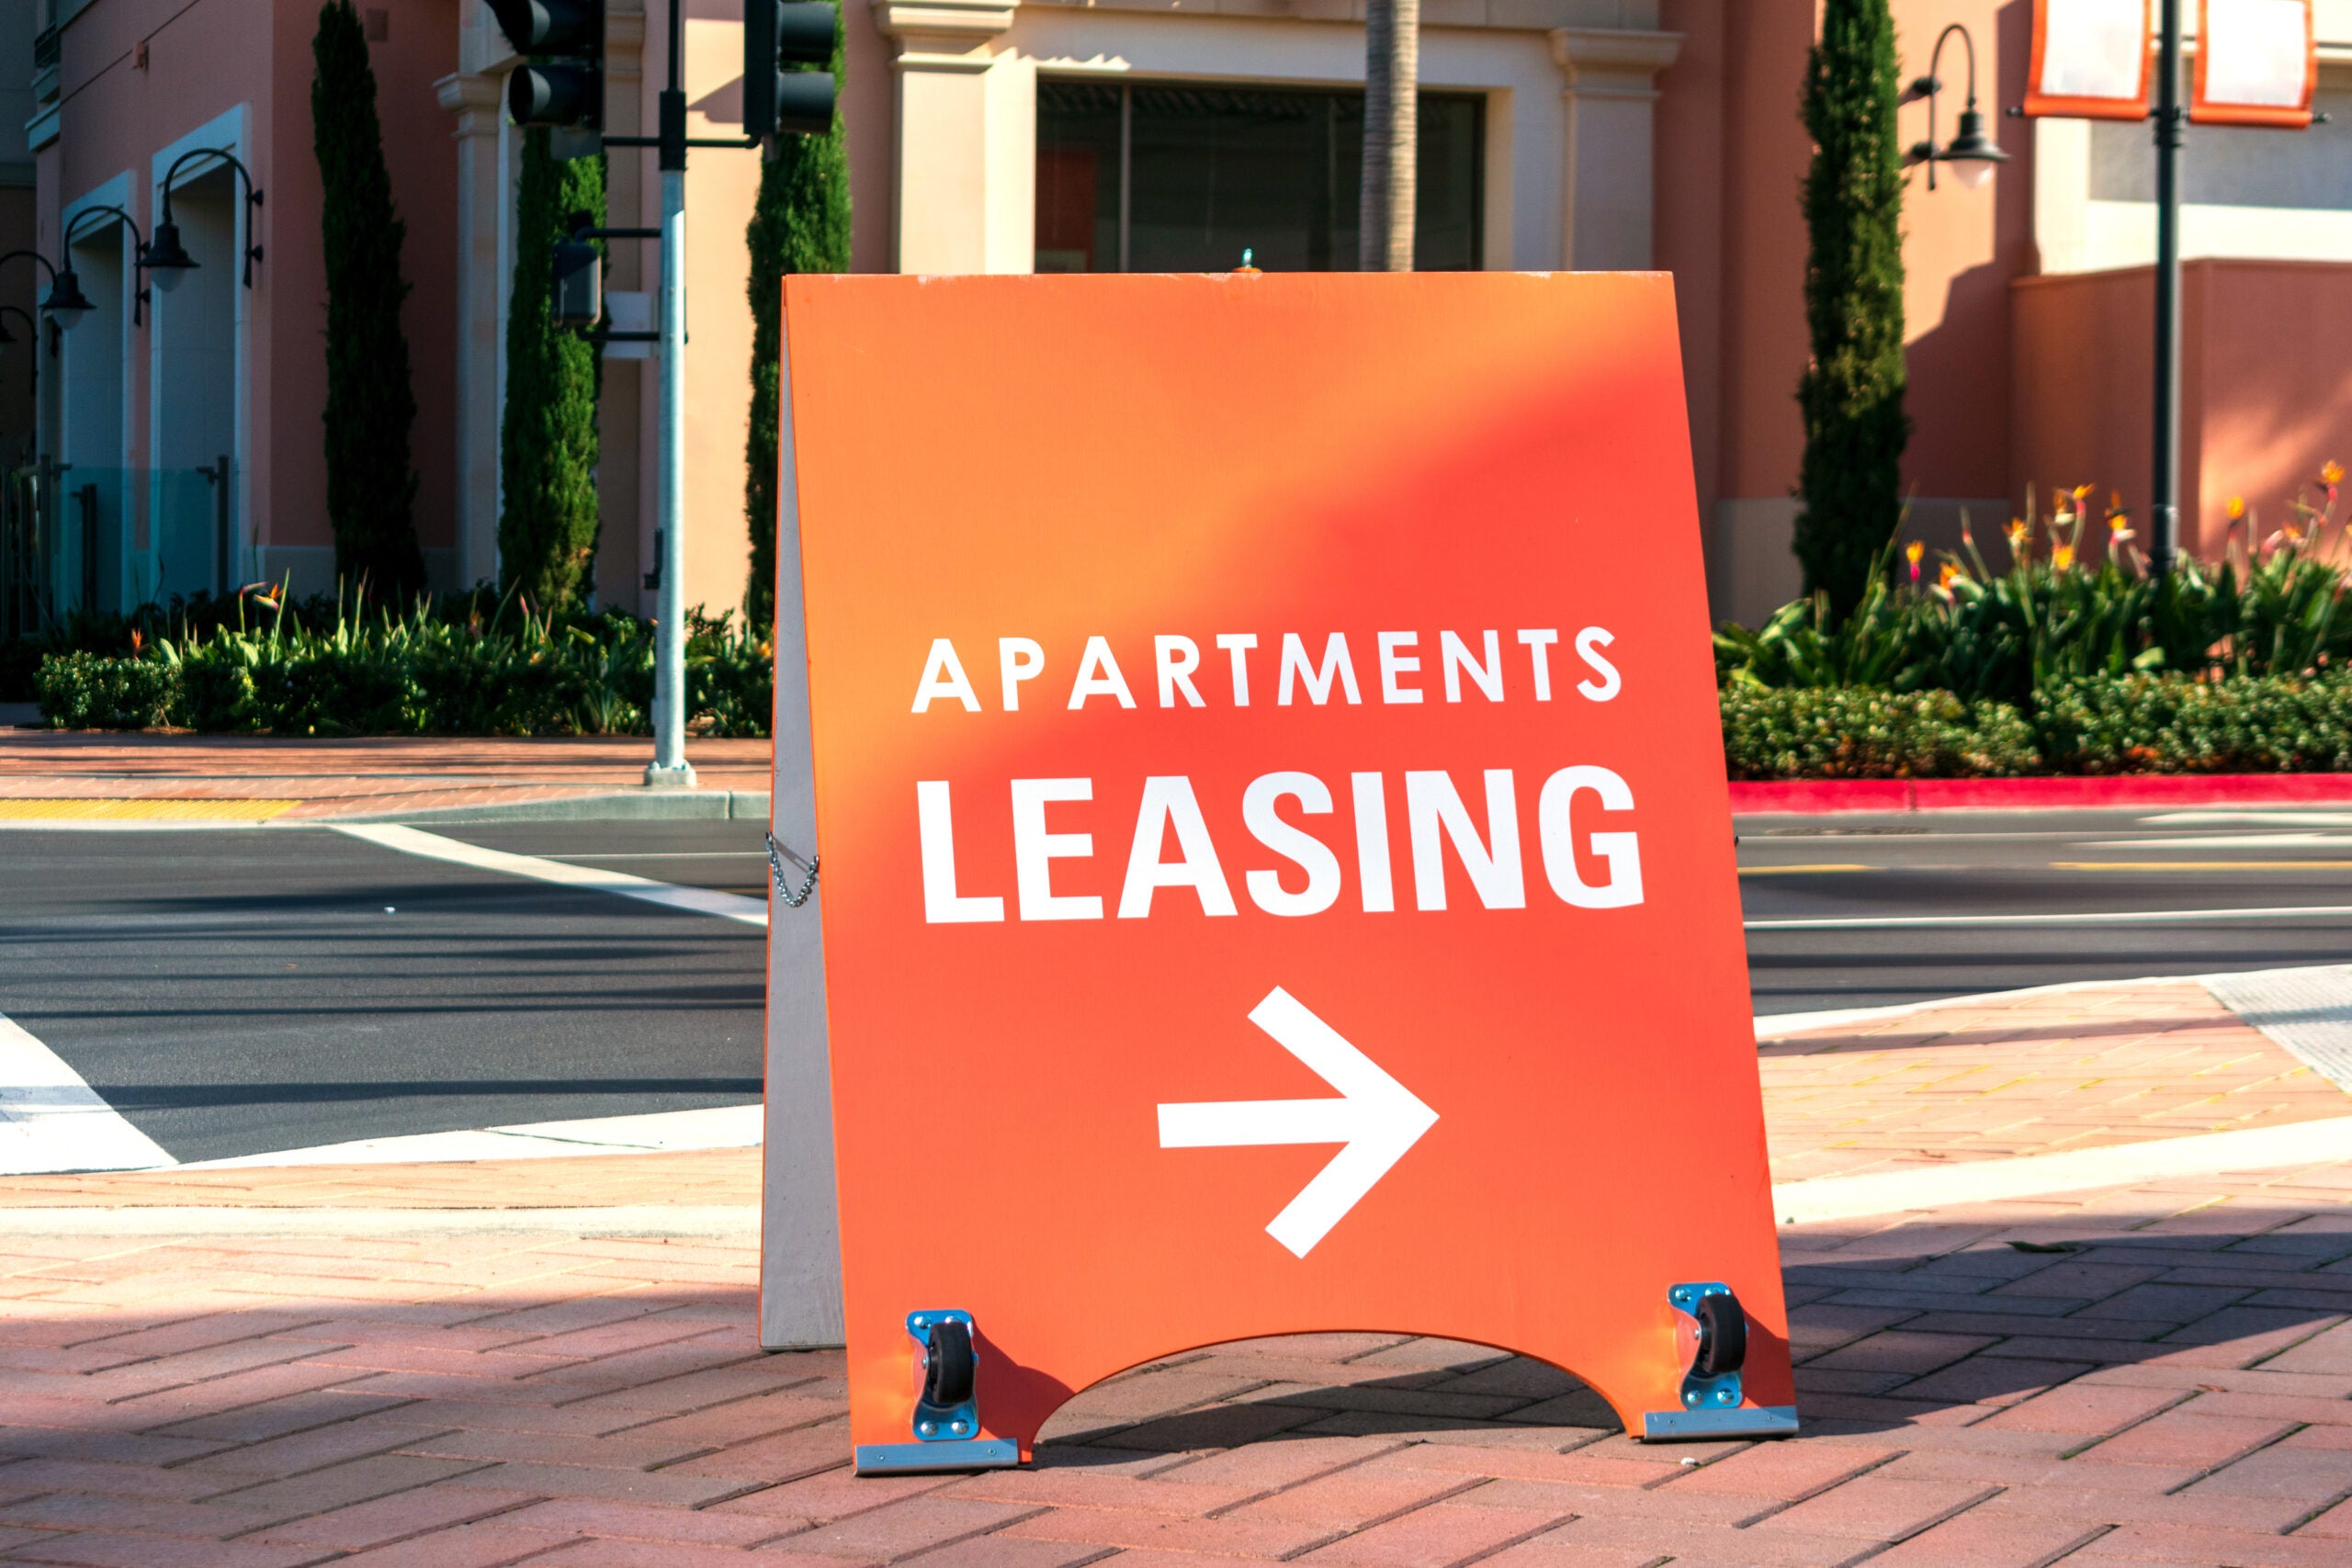 Apartment leasing sign promote the rental property and shows direction where the rental office is located.